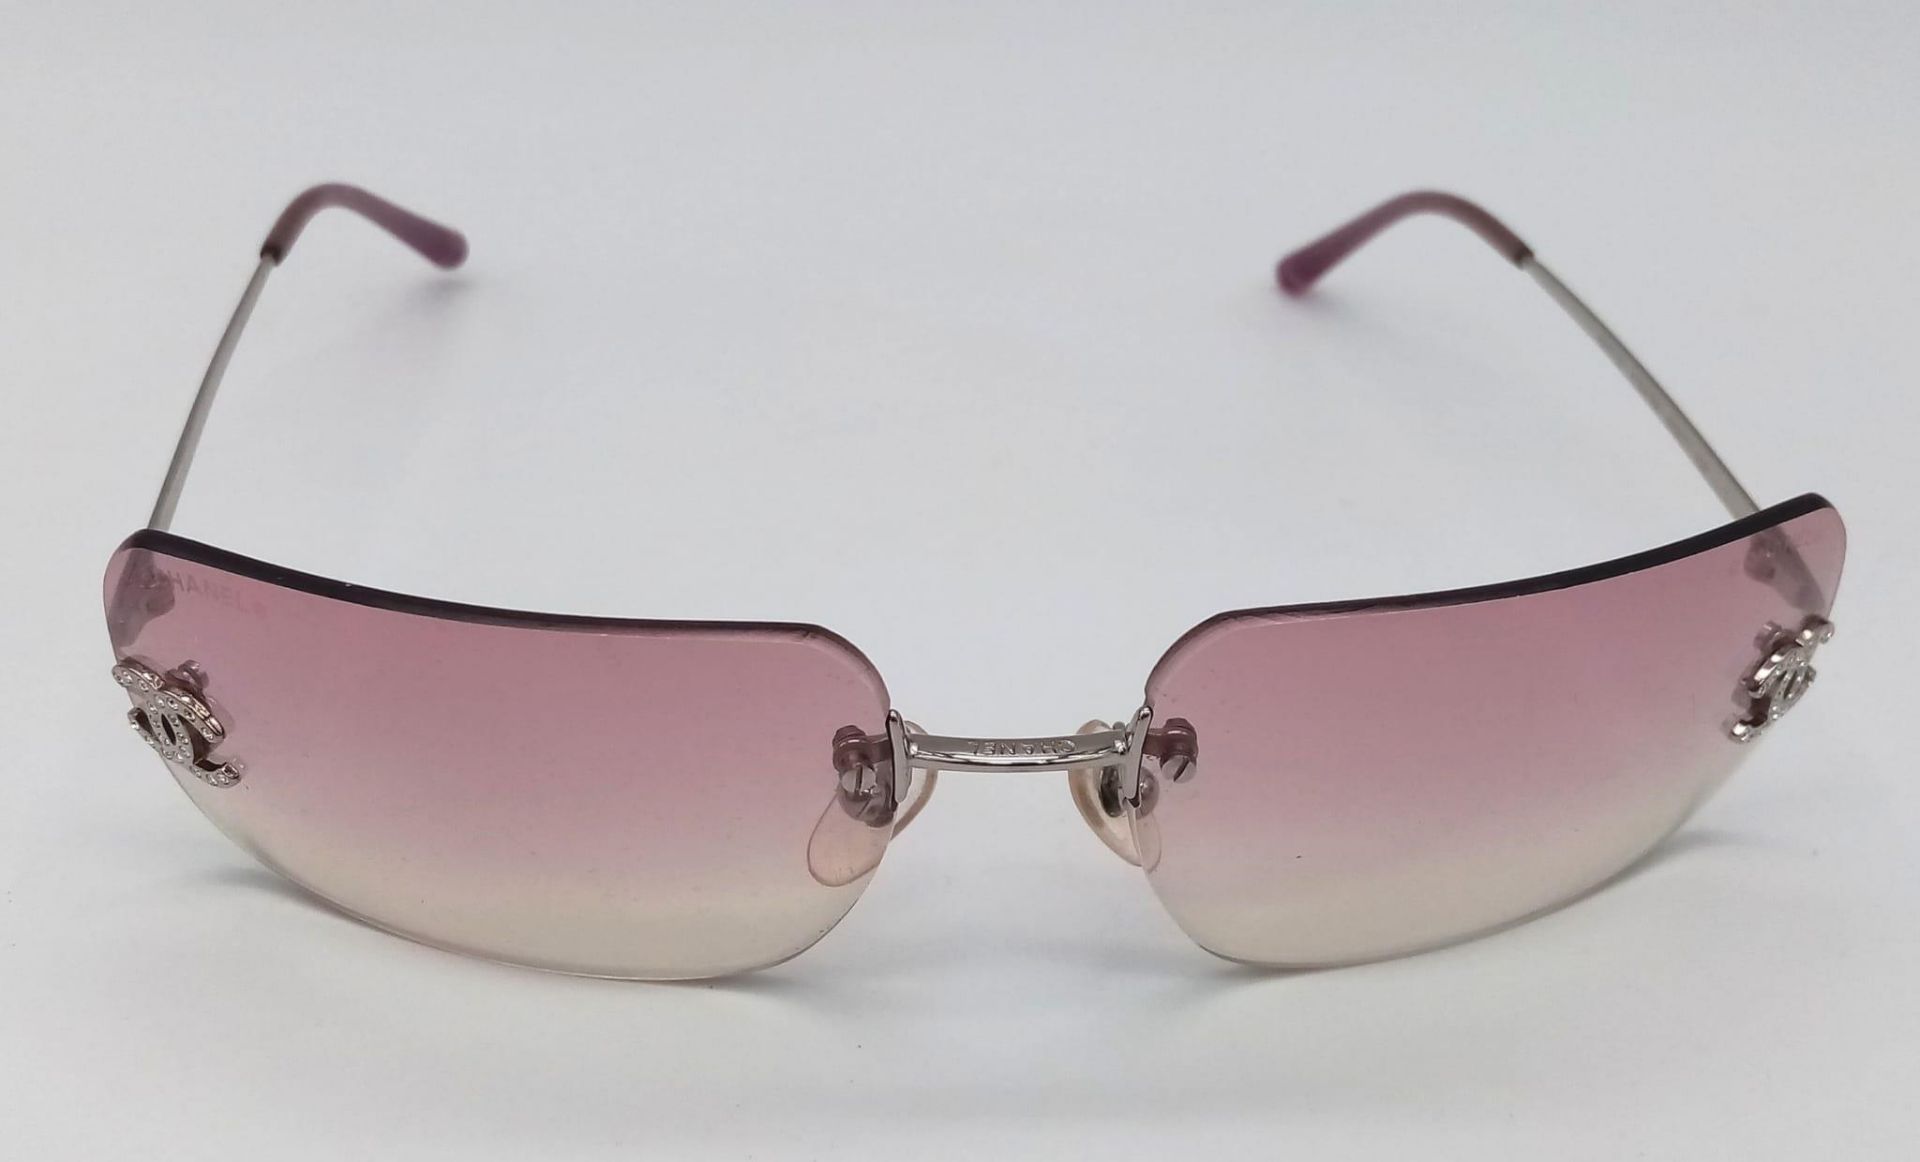 A Pair of Ladies Chanel Sunglasses with Chanel Case. Glasses in good condition - case is worn.